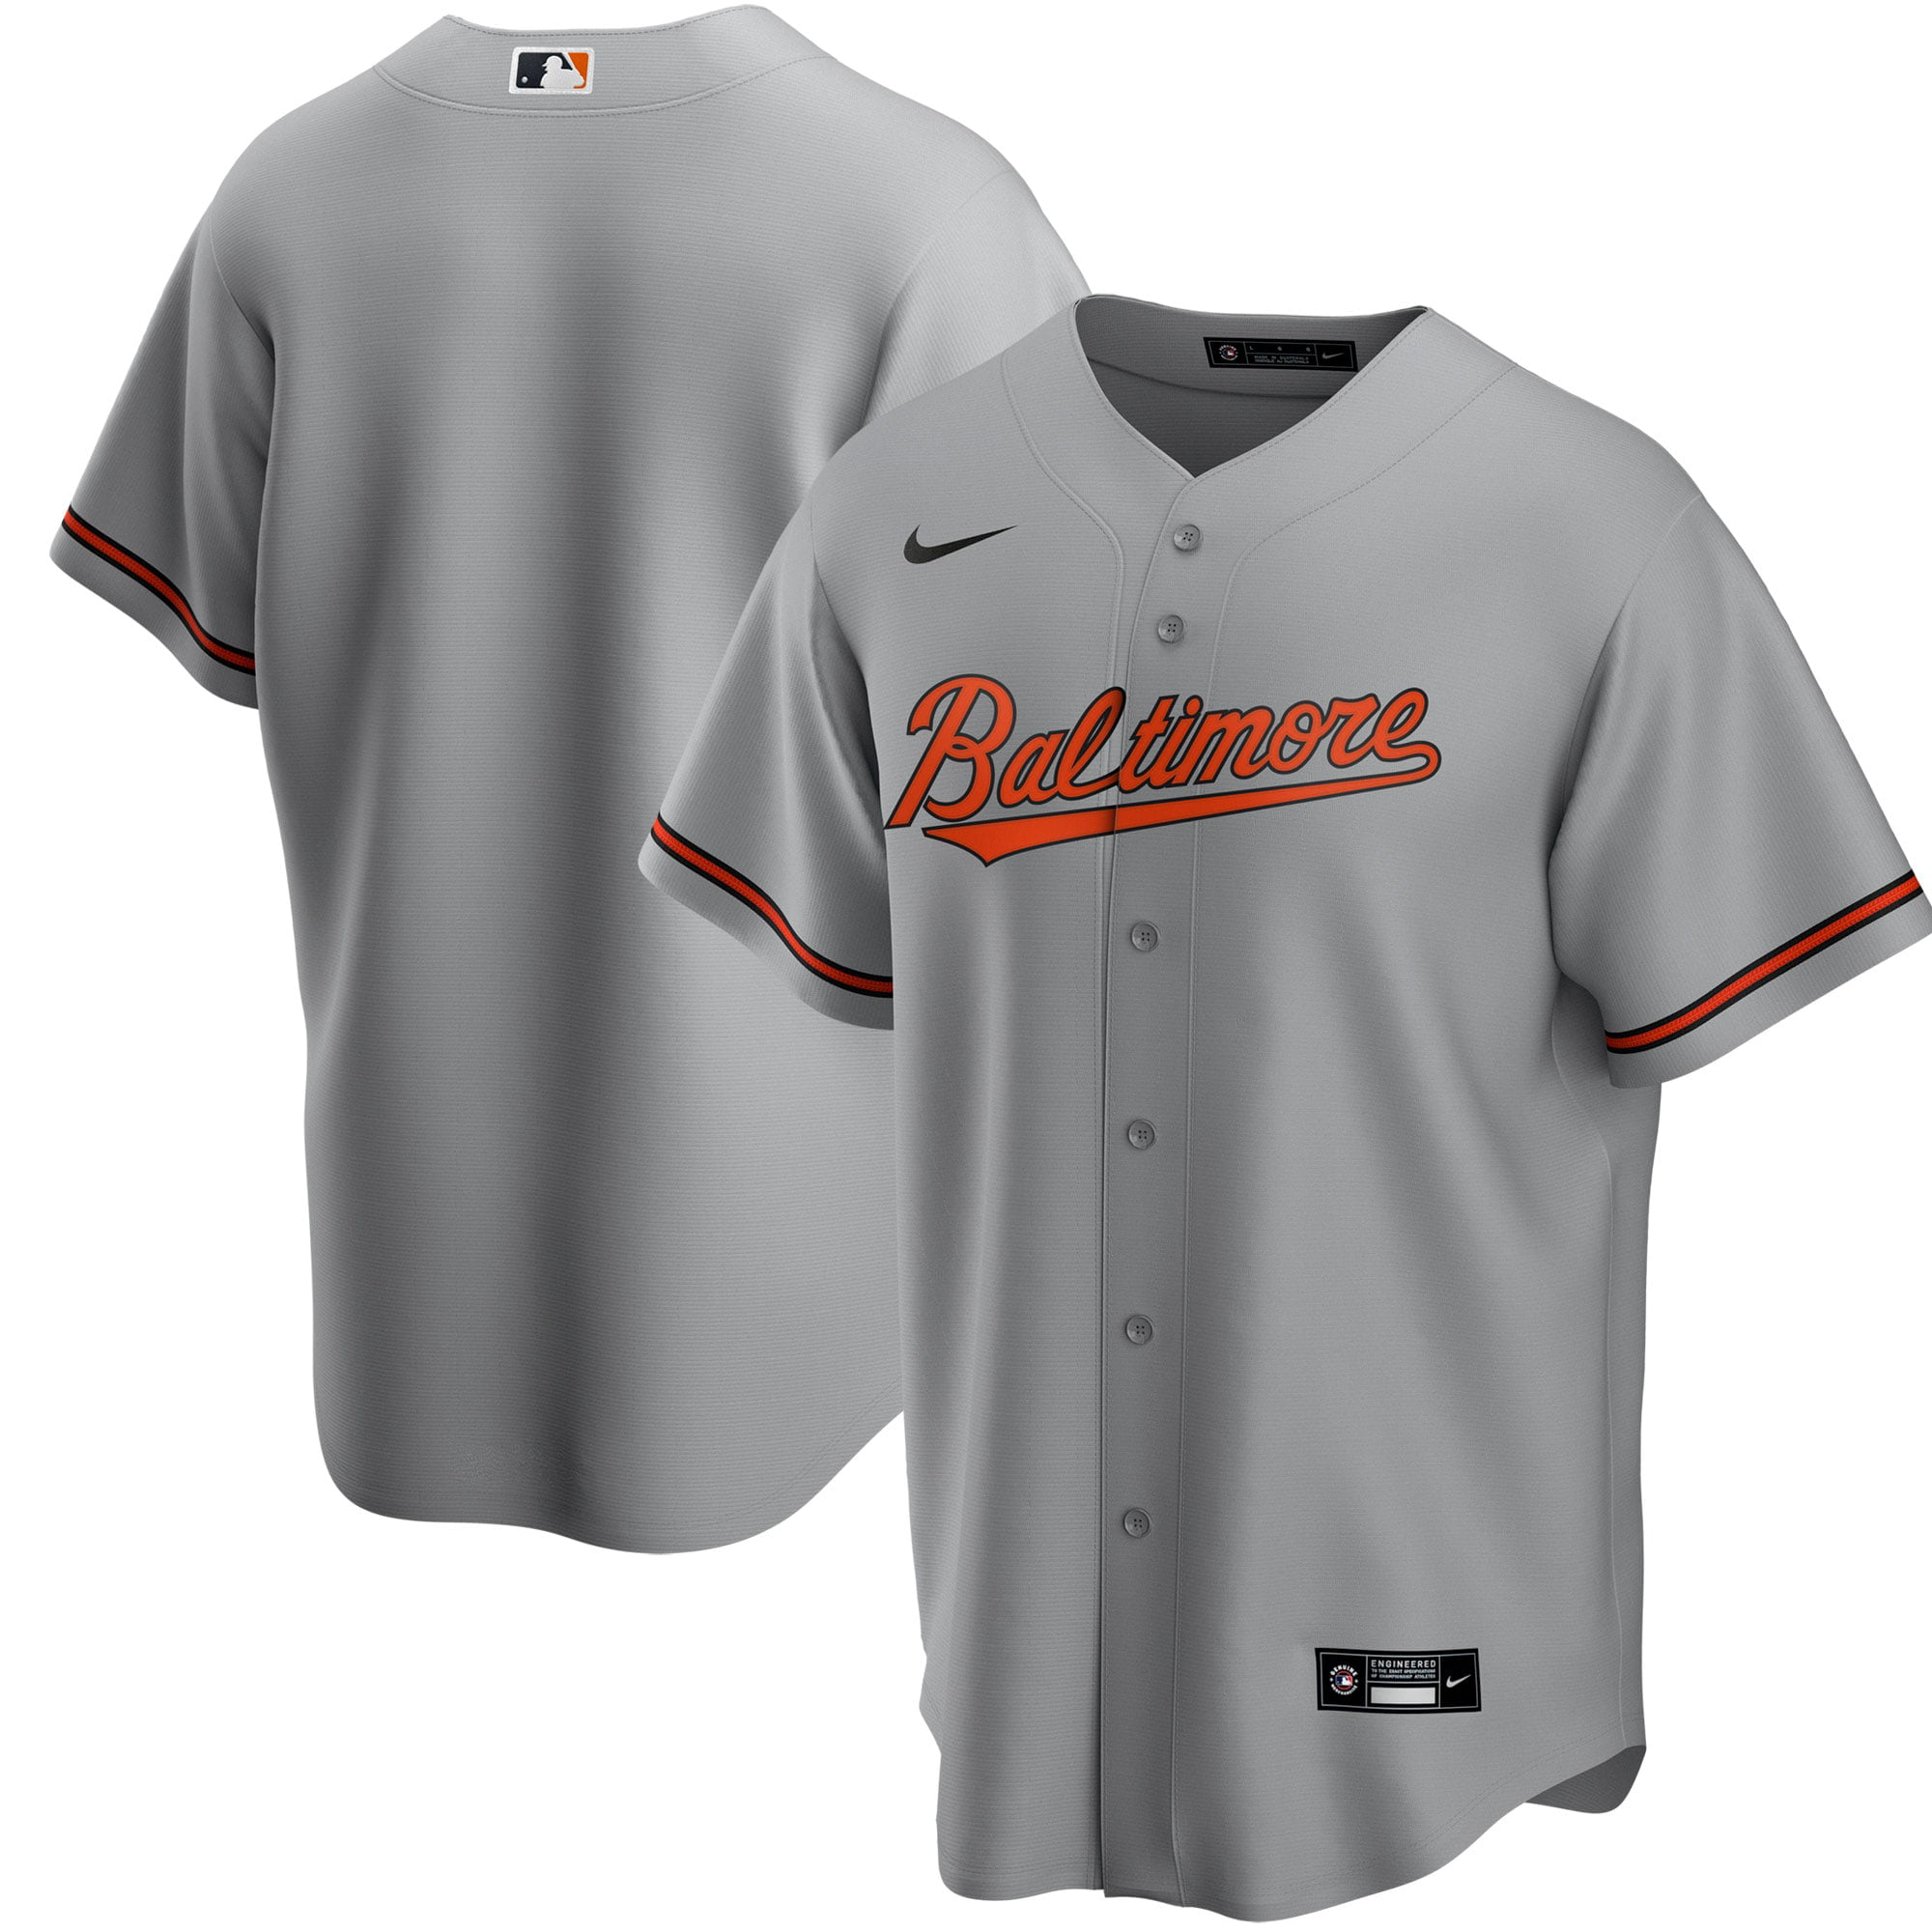 orioles white jersey